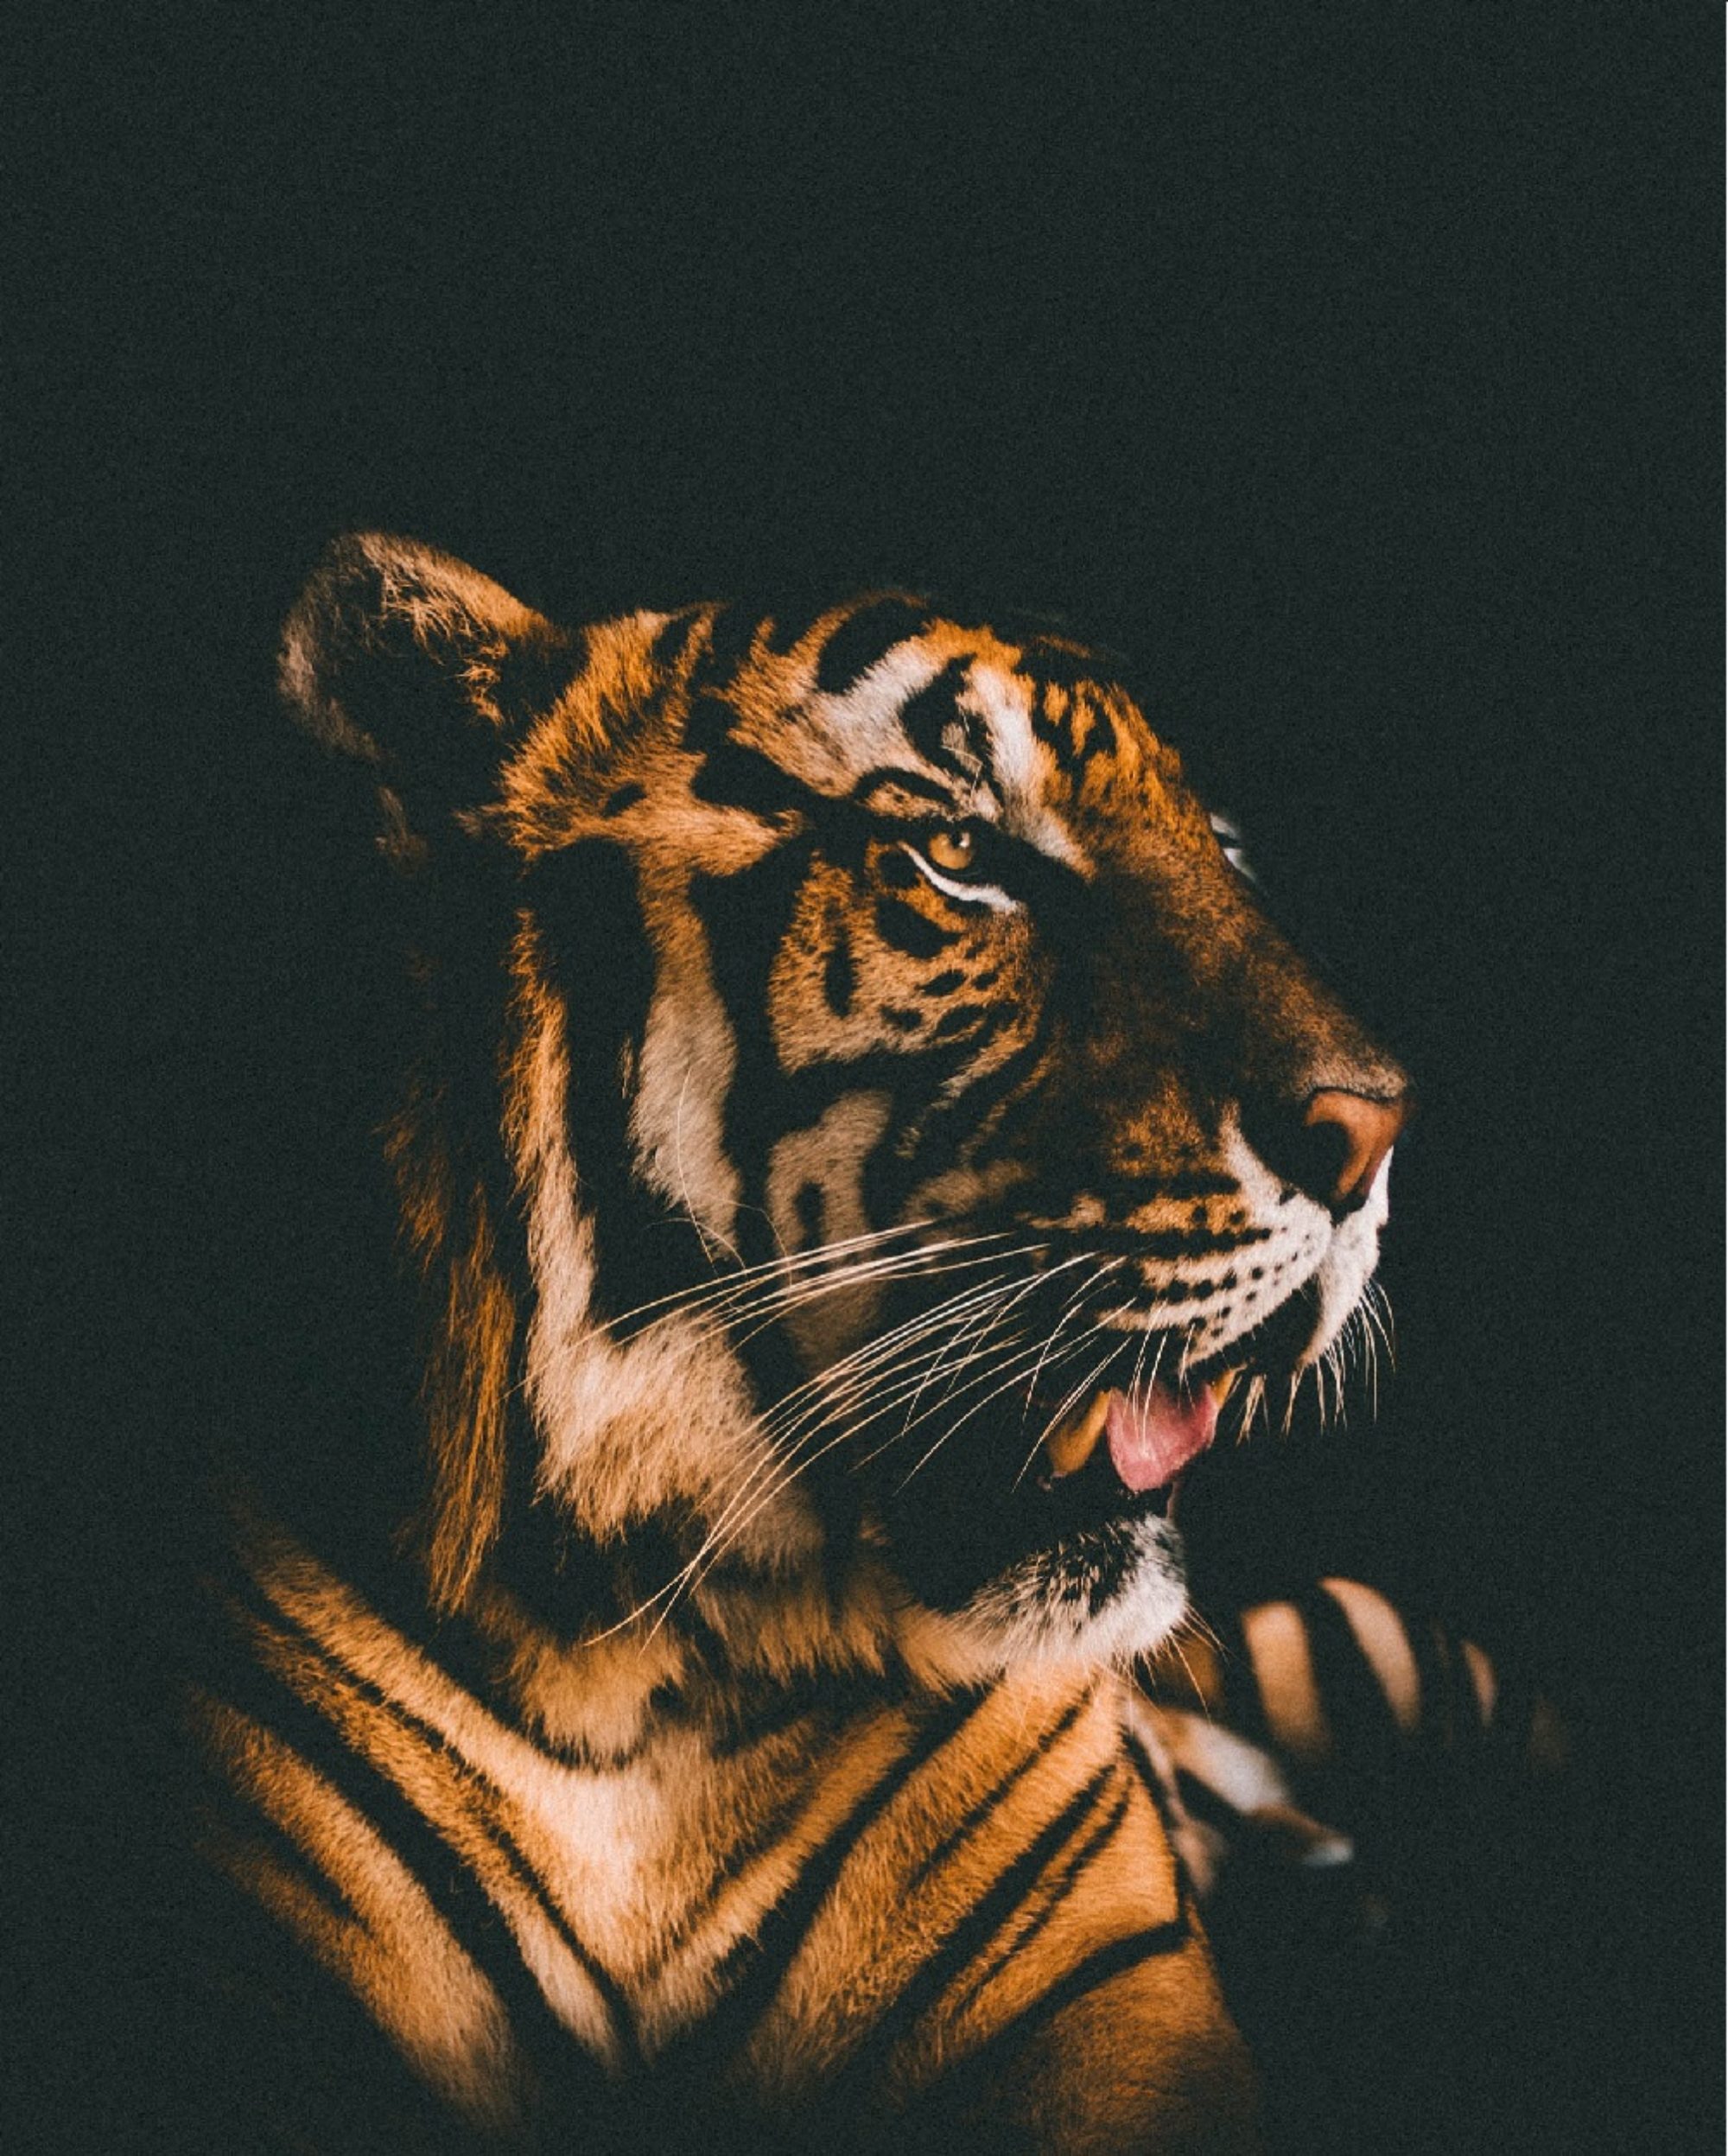 image of a tiger